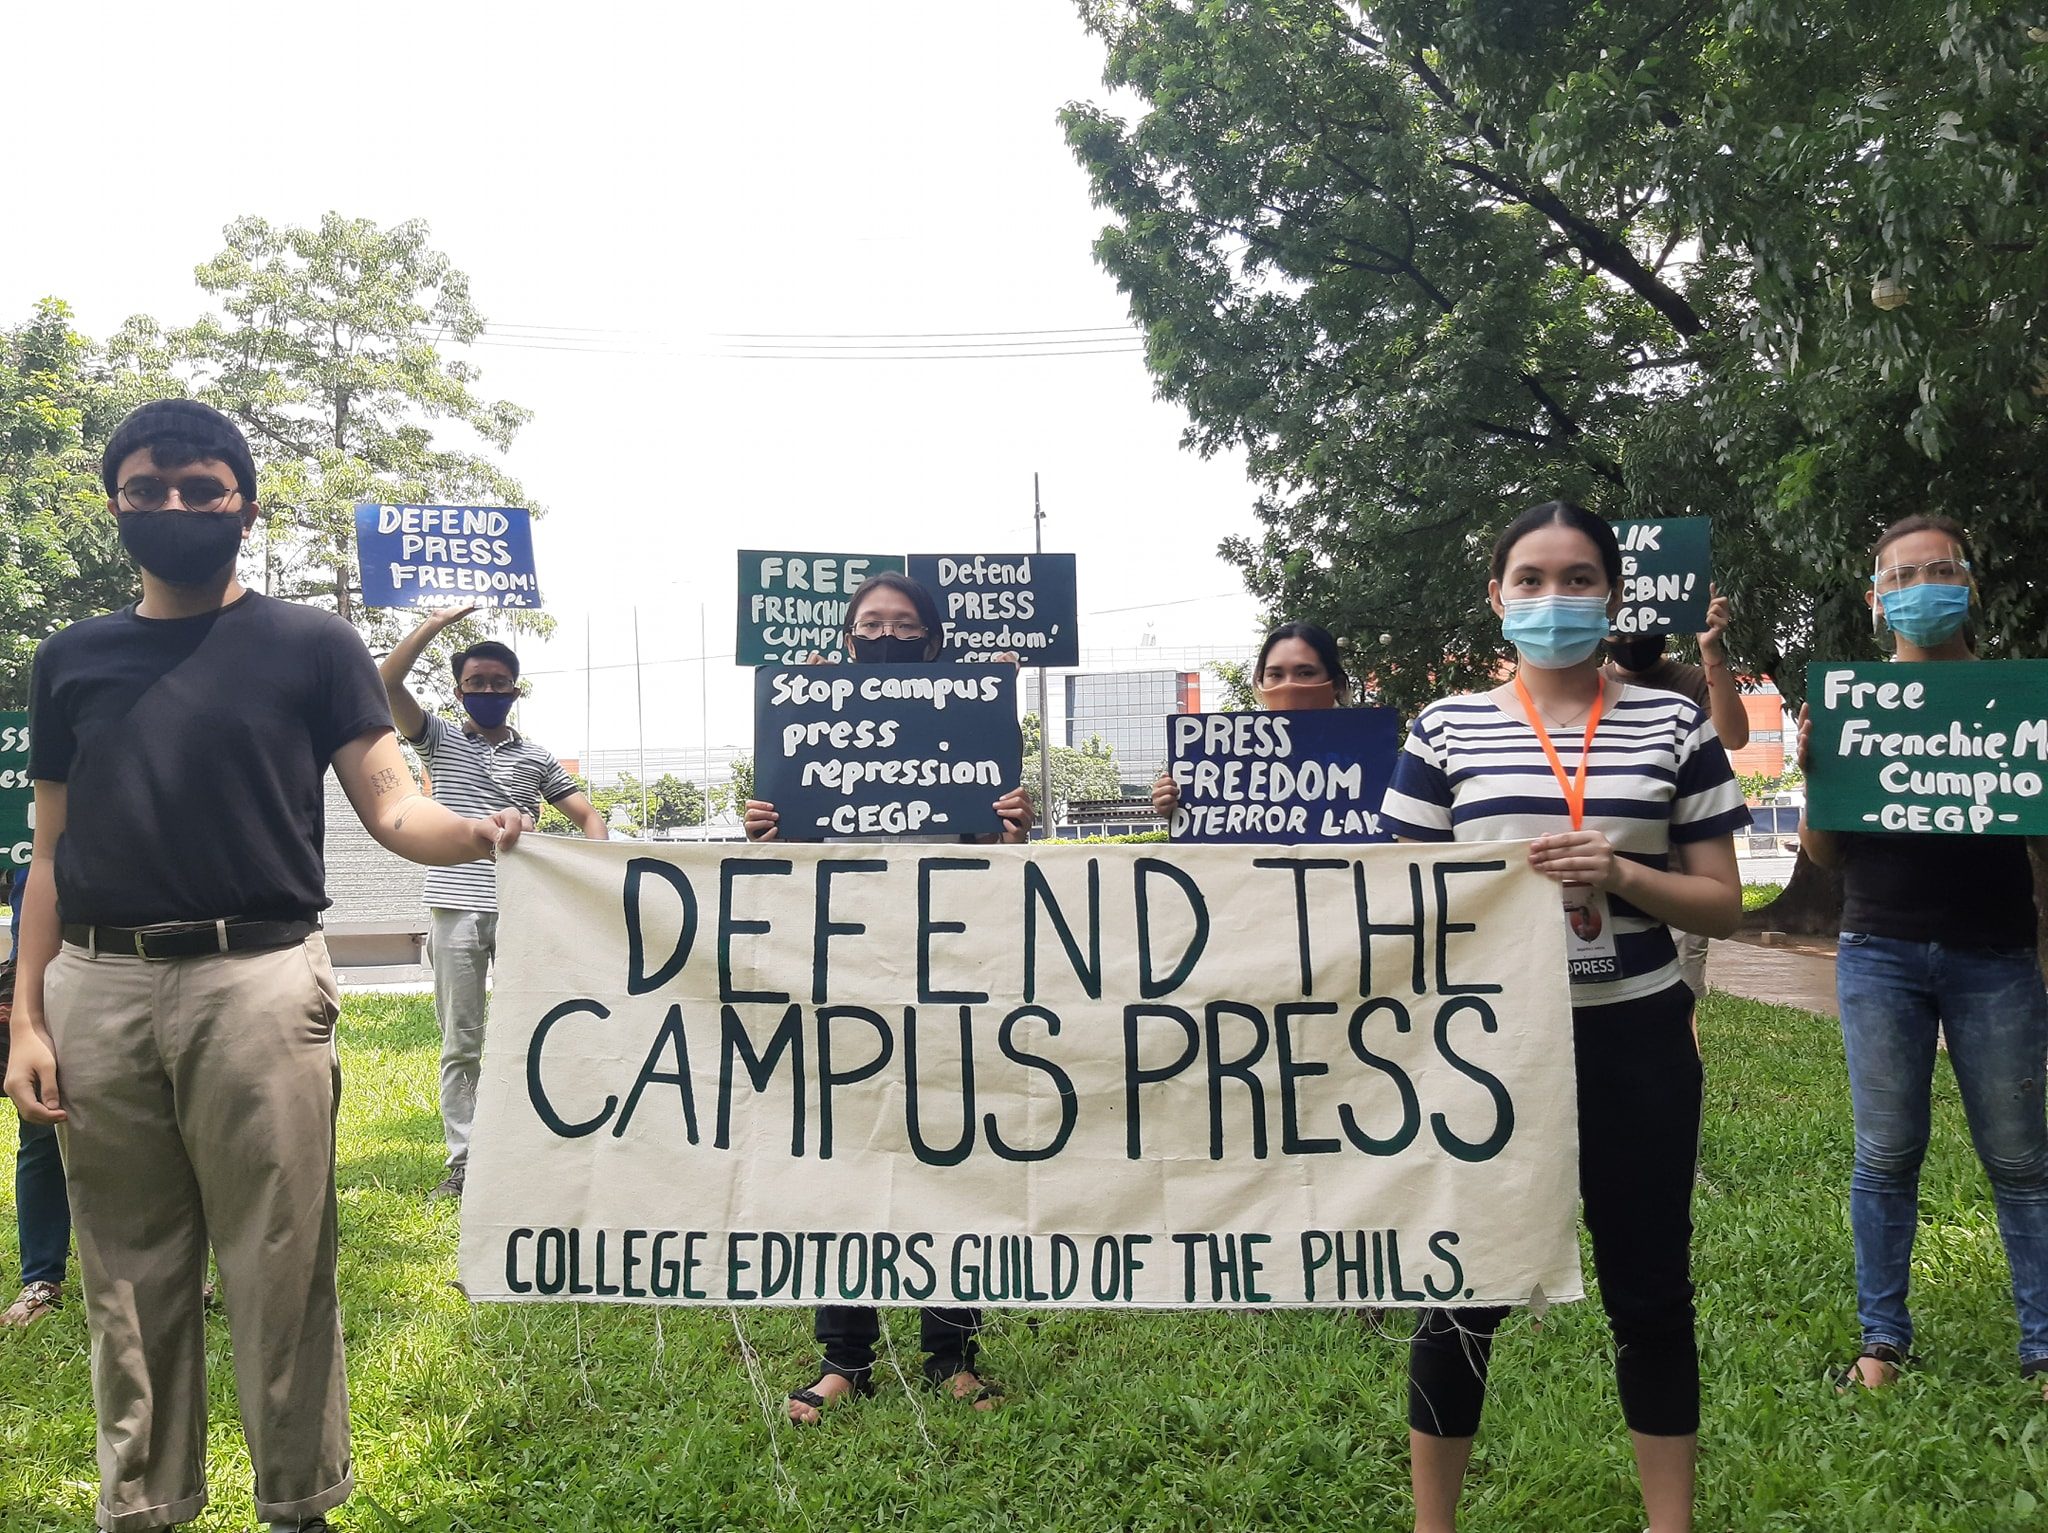 CEGP: Almost 1,000 violations against campus press freedom since 2010